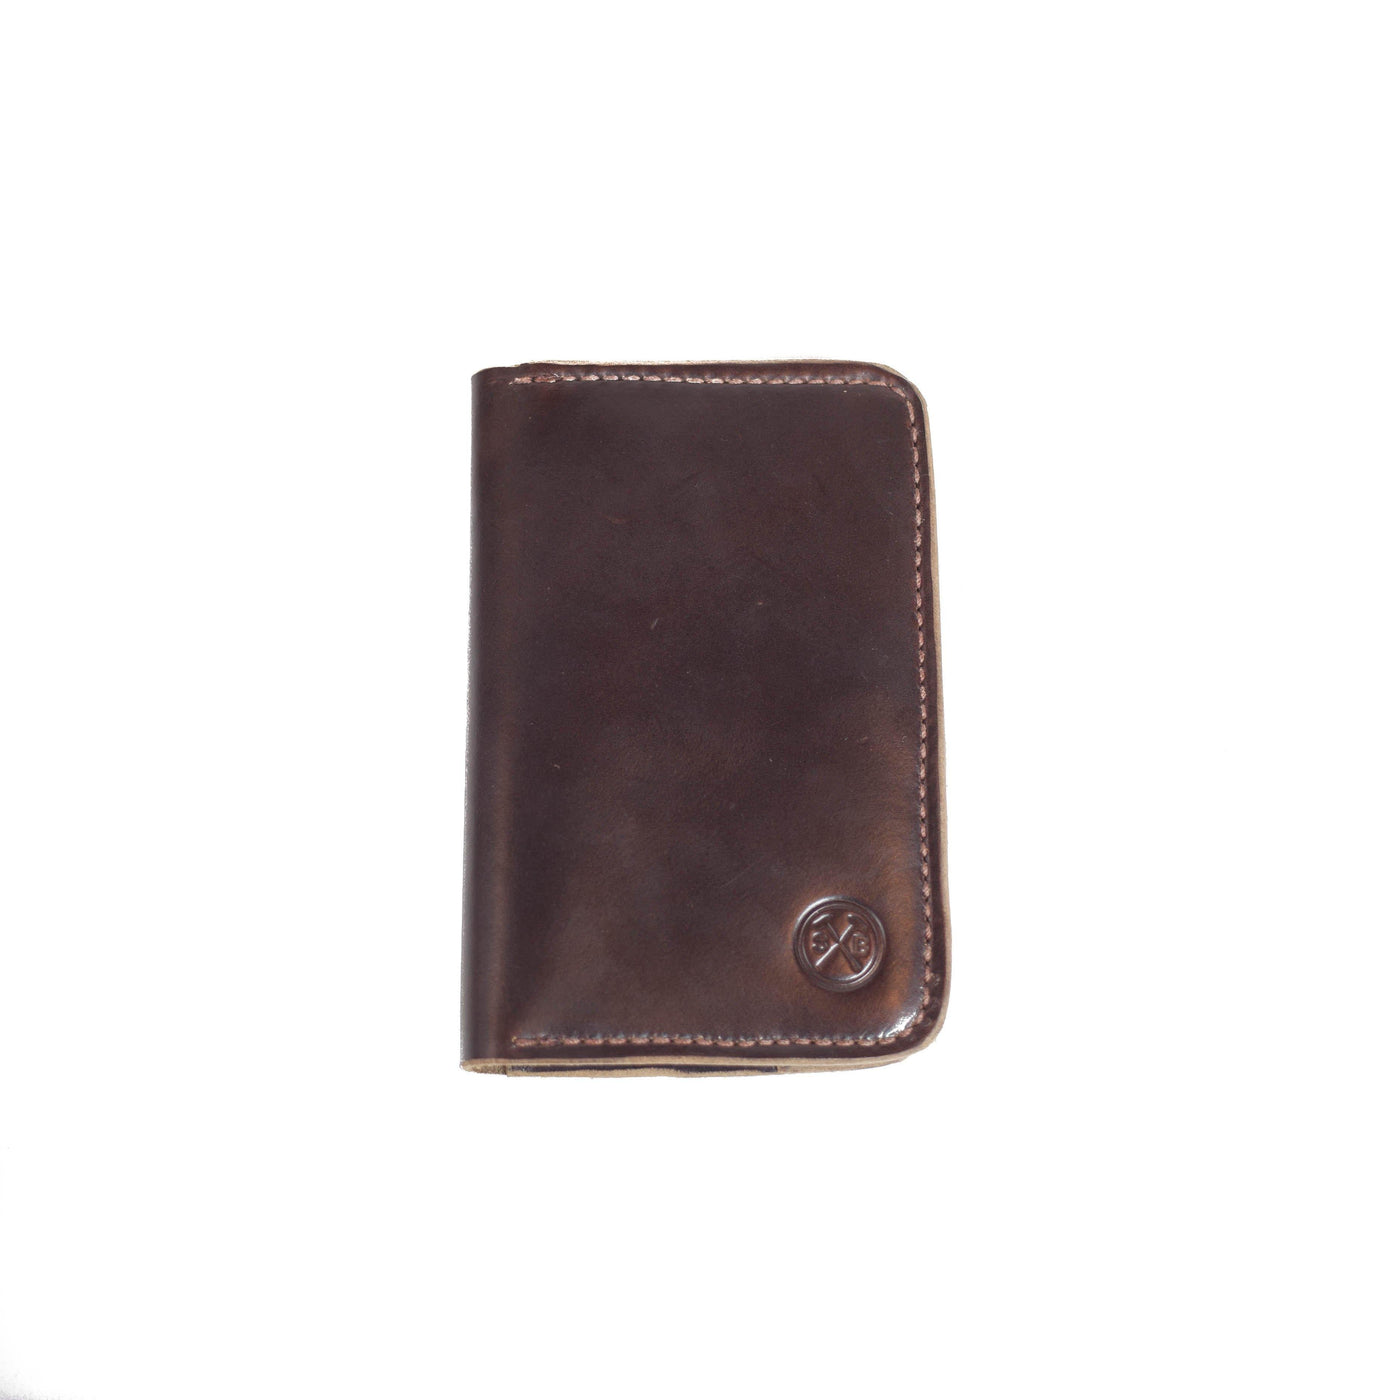 Wayfaring Carry Wallet Seahawk Chromexcel by Sturdy Brothers